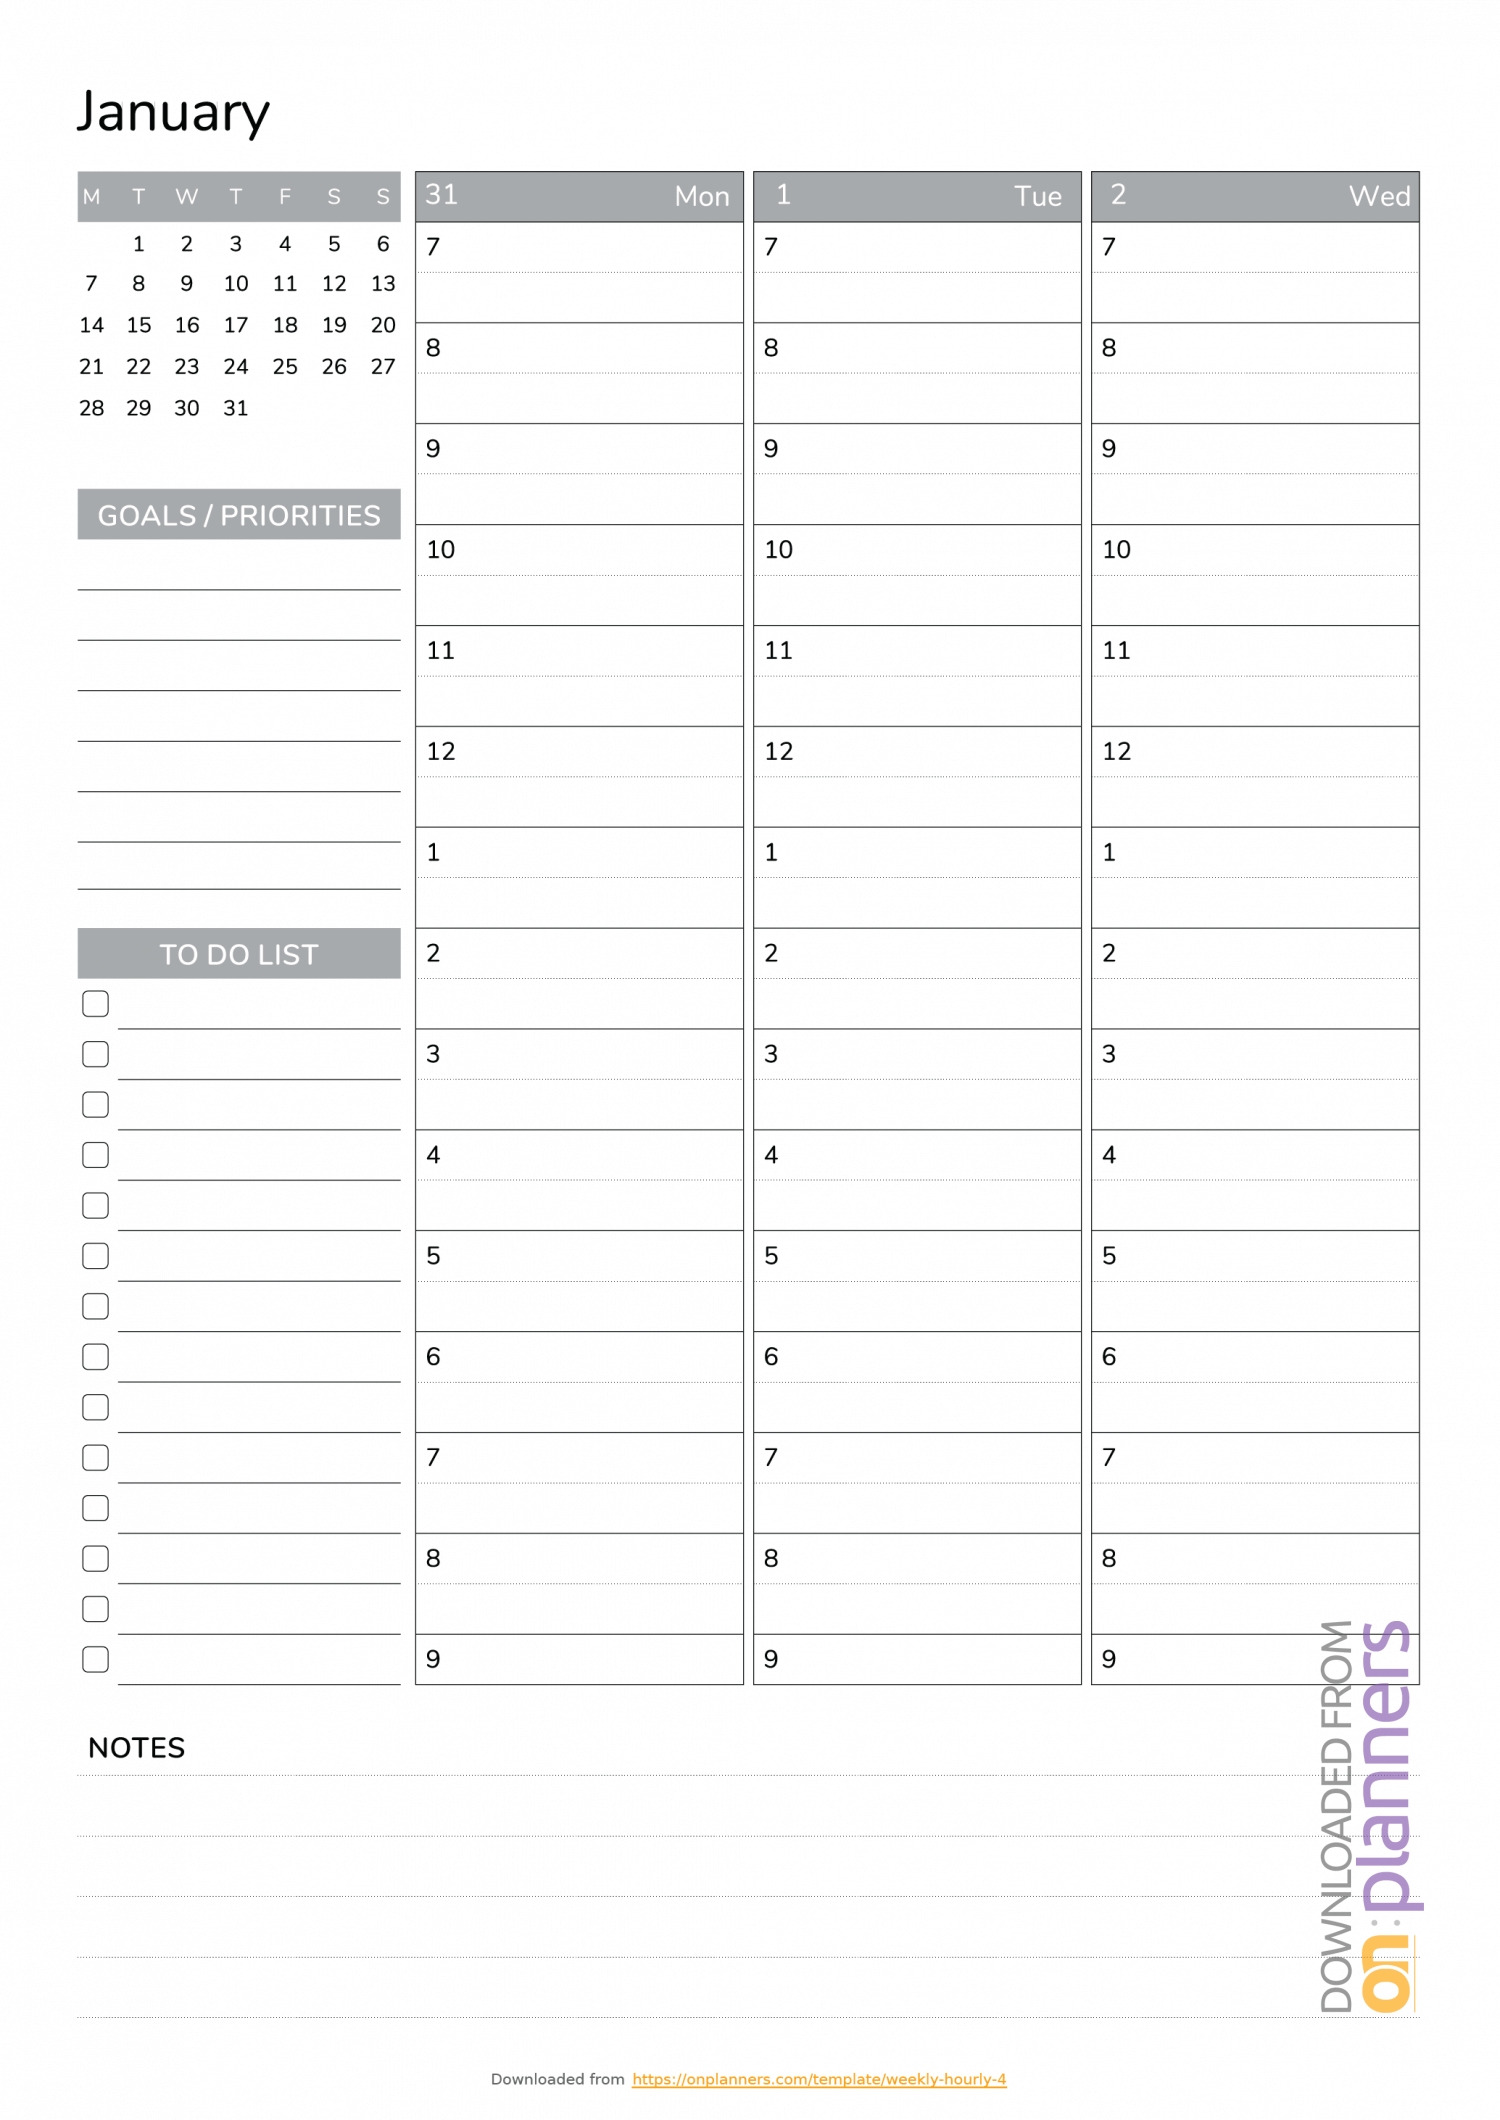 The Best Weekly Schedule Templates. Organize Your Time 9 Day Calendar Template